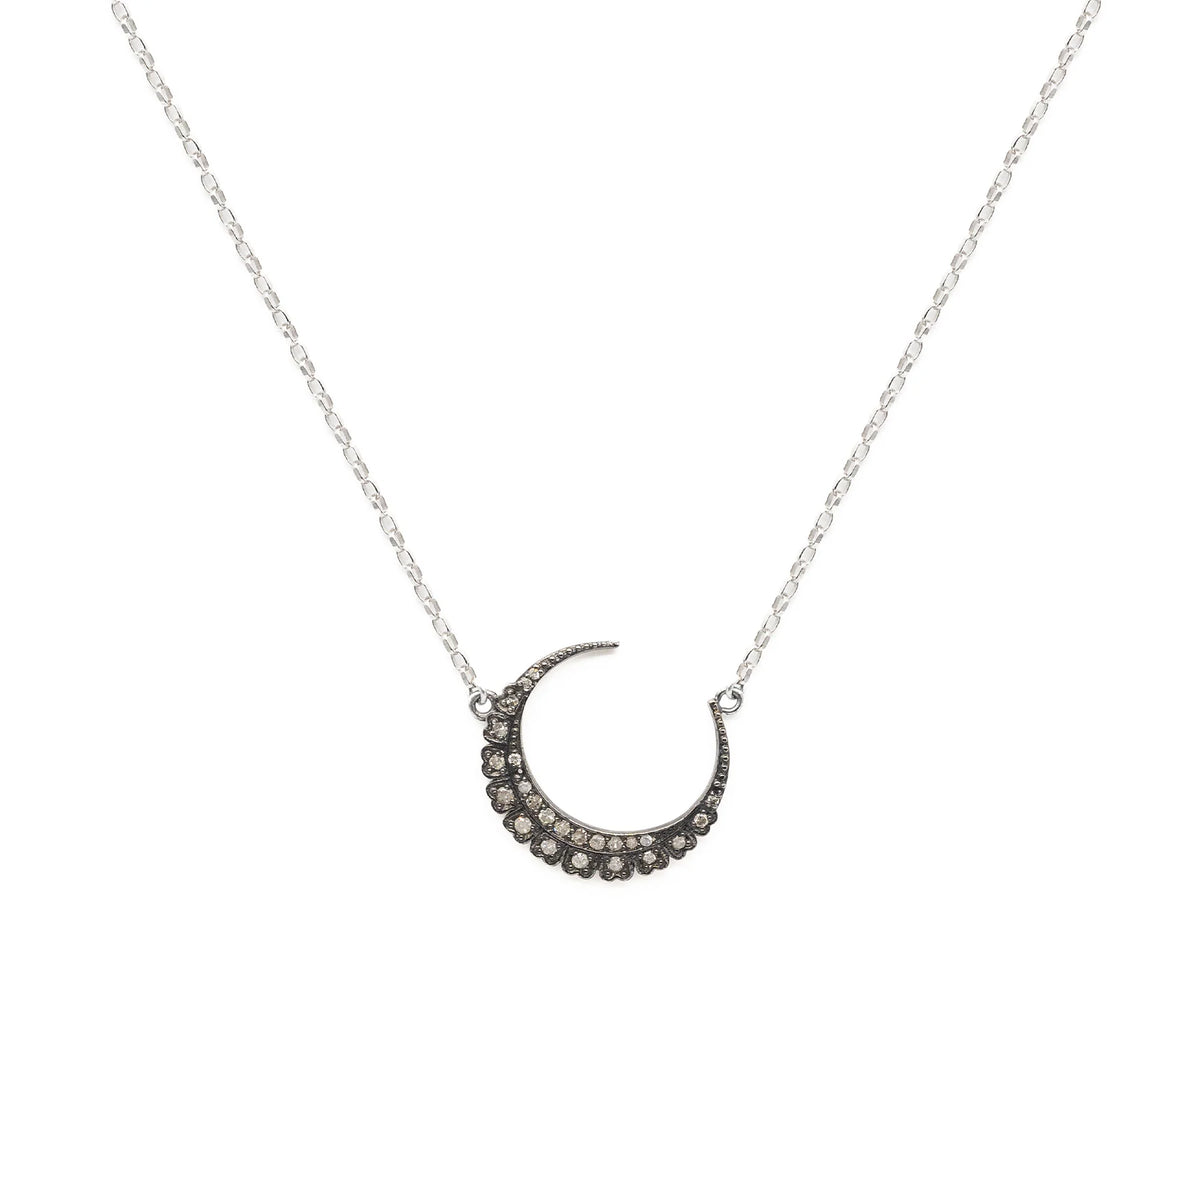 White gold plated sterling silver necklace with a diamond studded pave crescent 